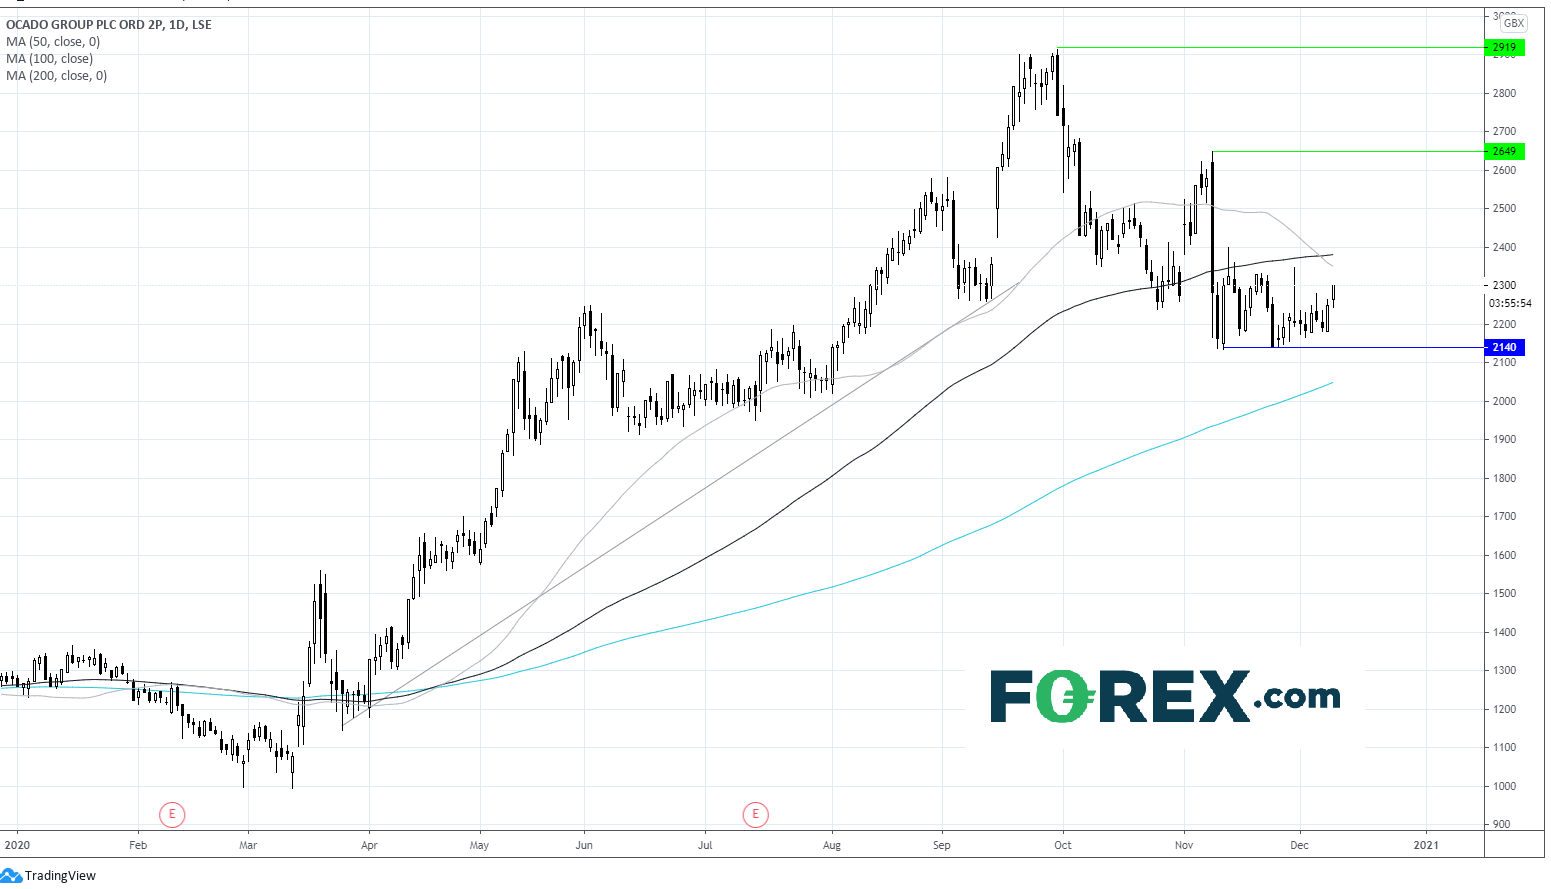 Market chart of Ocado Group toward Q4-2020. Published in December 2020 by FOREX.com